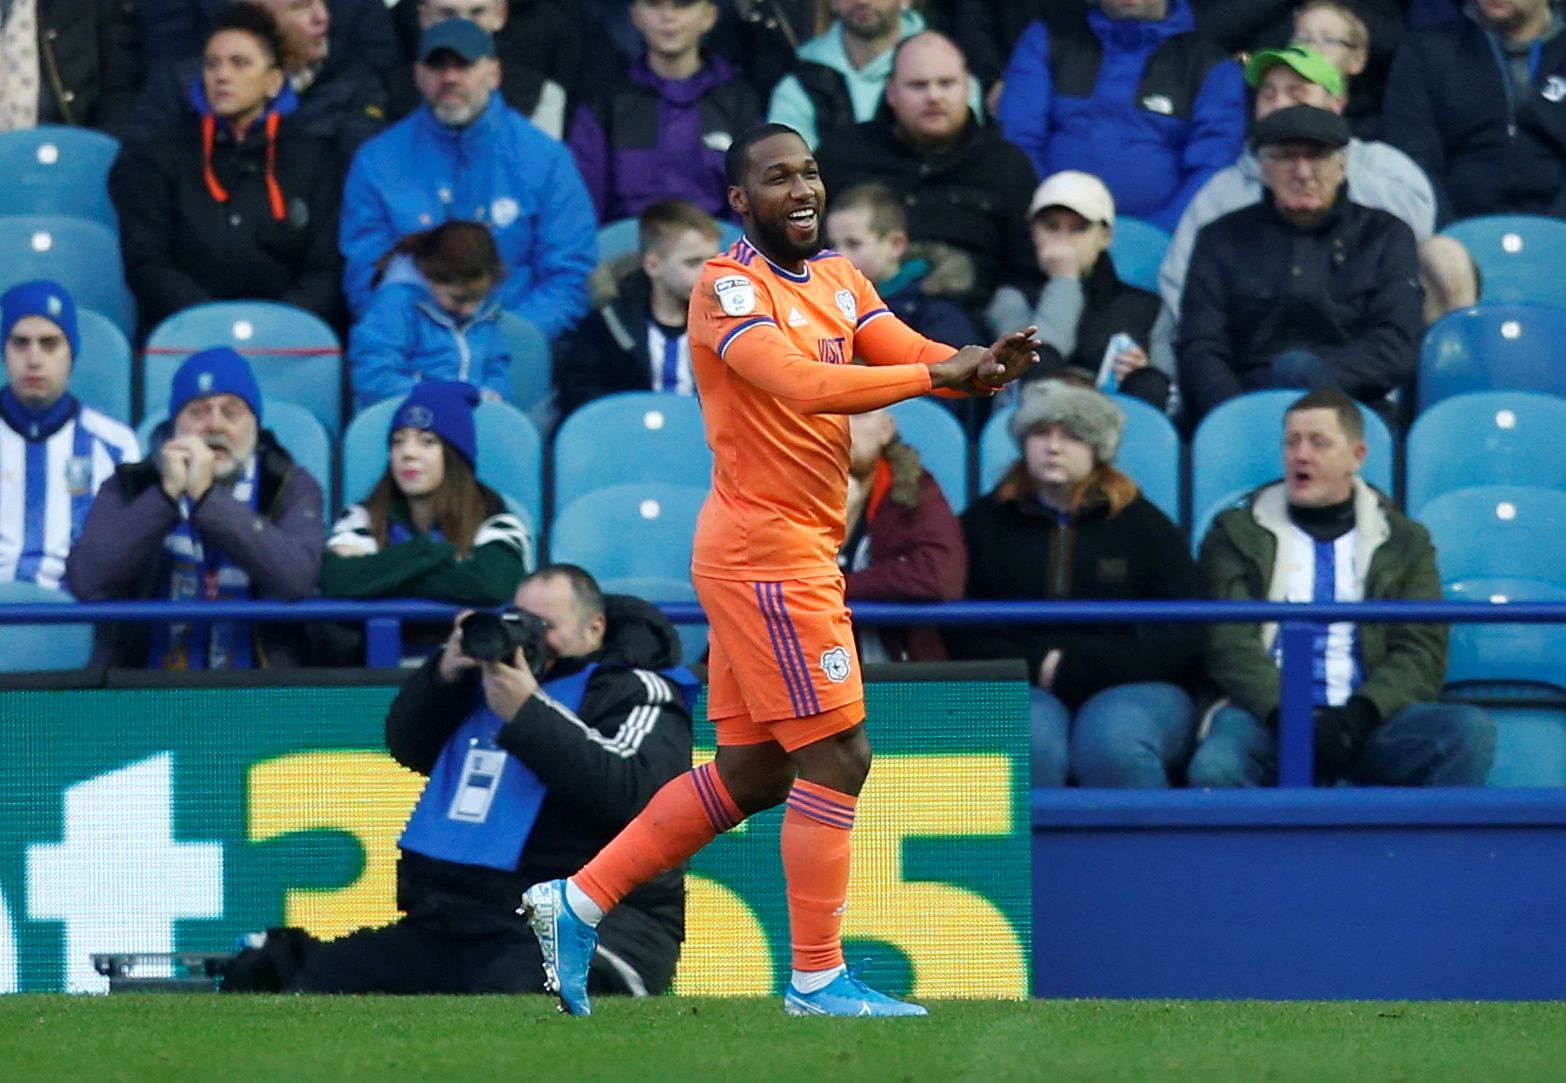 Soccer Football - Championship - Sheffield Wednesday v Cardiff City - Hillsborough, Sheffield, Britain - December 29, 2019  Cardiff City's Junior Hoilett celebrates scoring their second goal  Action Images/Ed Sykes  EDITORIAL USE ONLY. No use with unauthorized audio, video, data, fixture lists, club/league logos or 